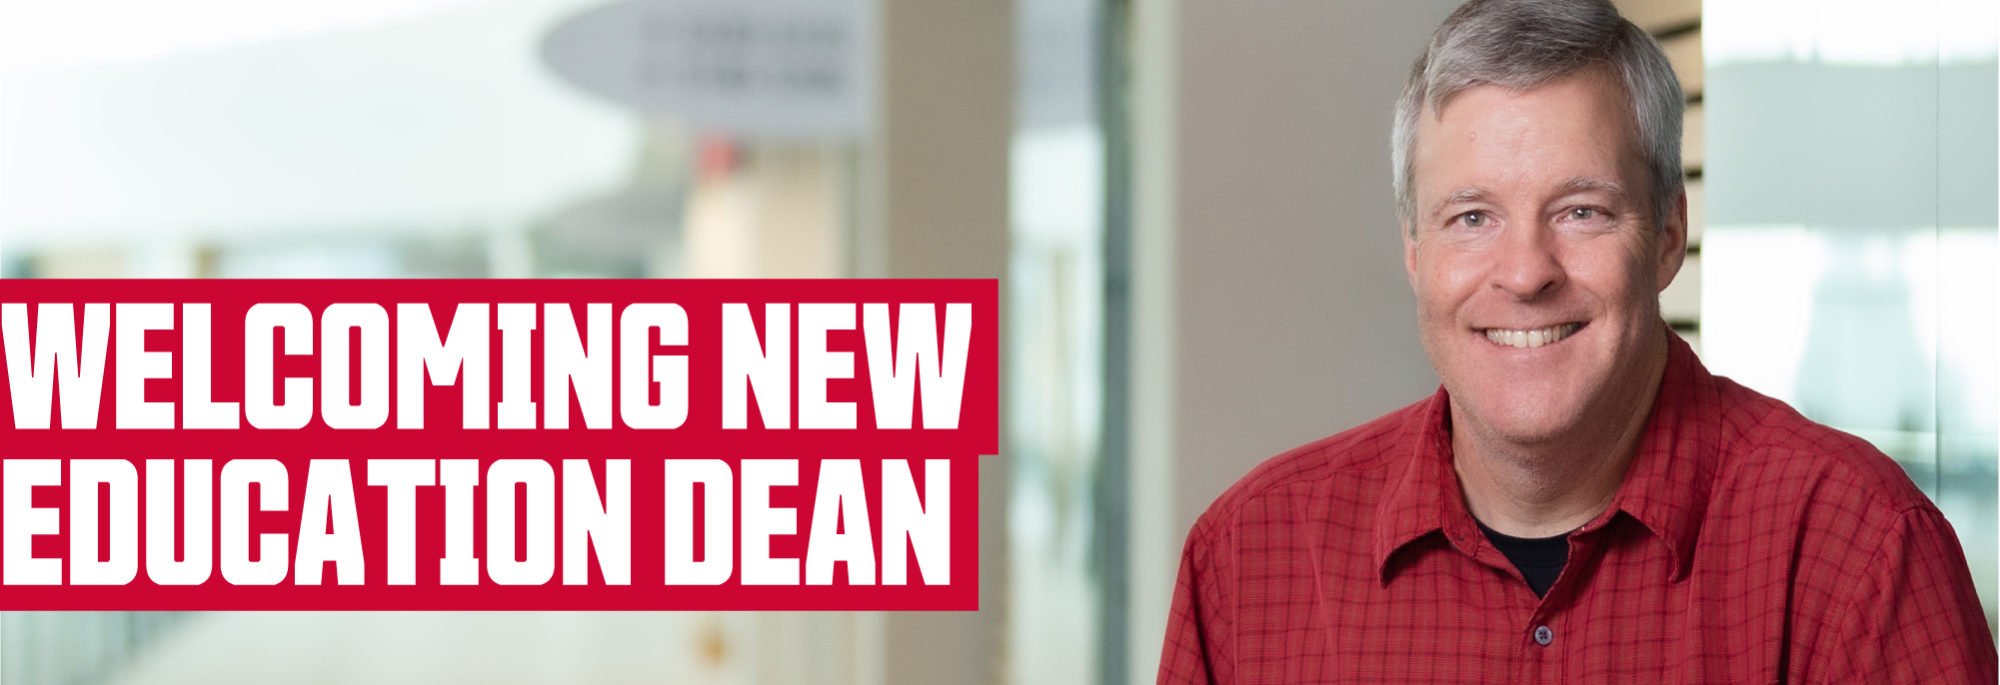 Welcoming new Education Dean: Dr. Daniel Laitsch